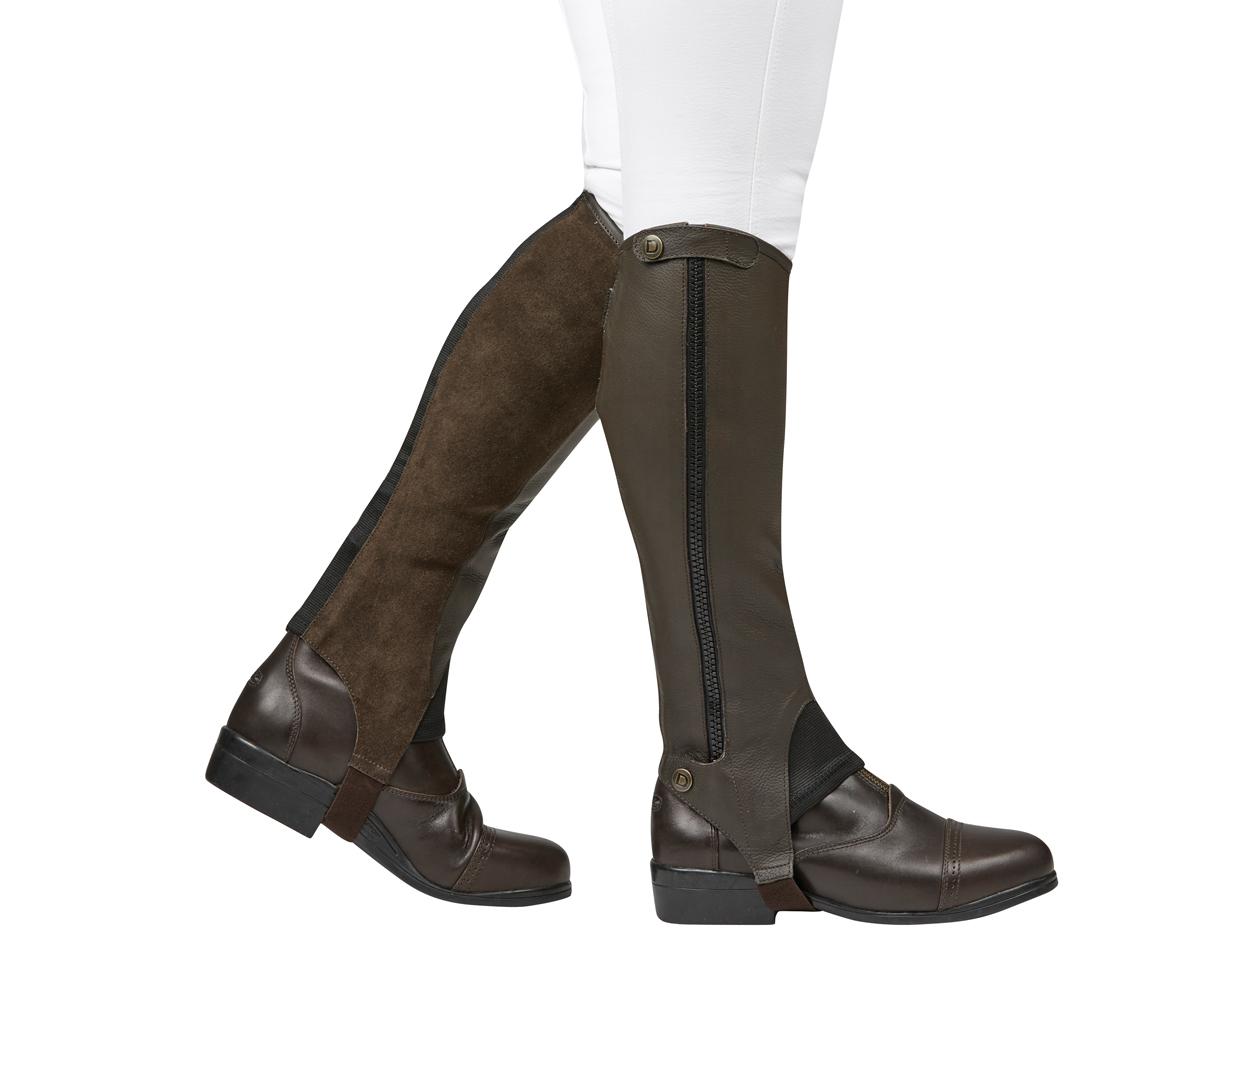 Soft Leather Half Chaps in Black & Brown 